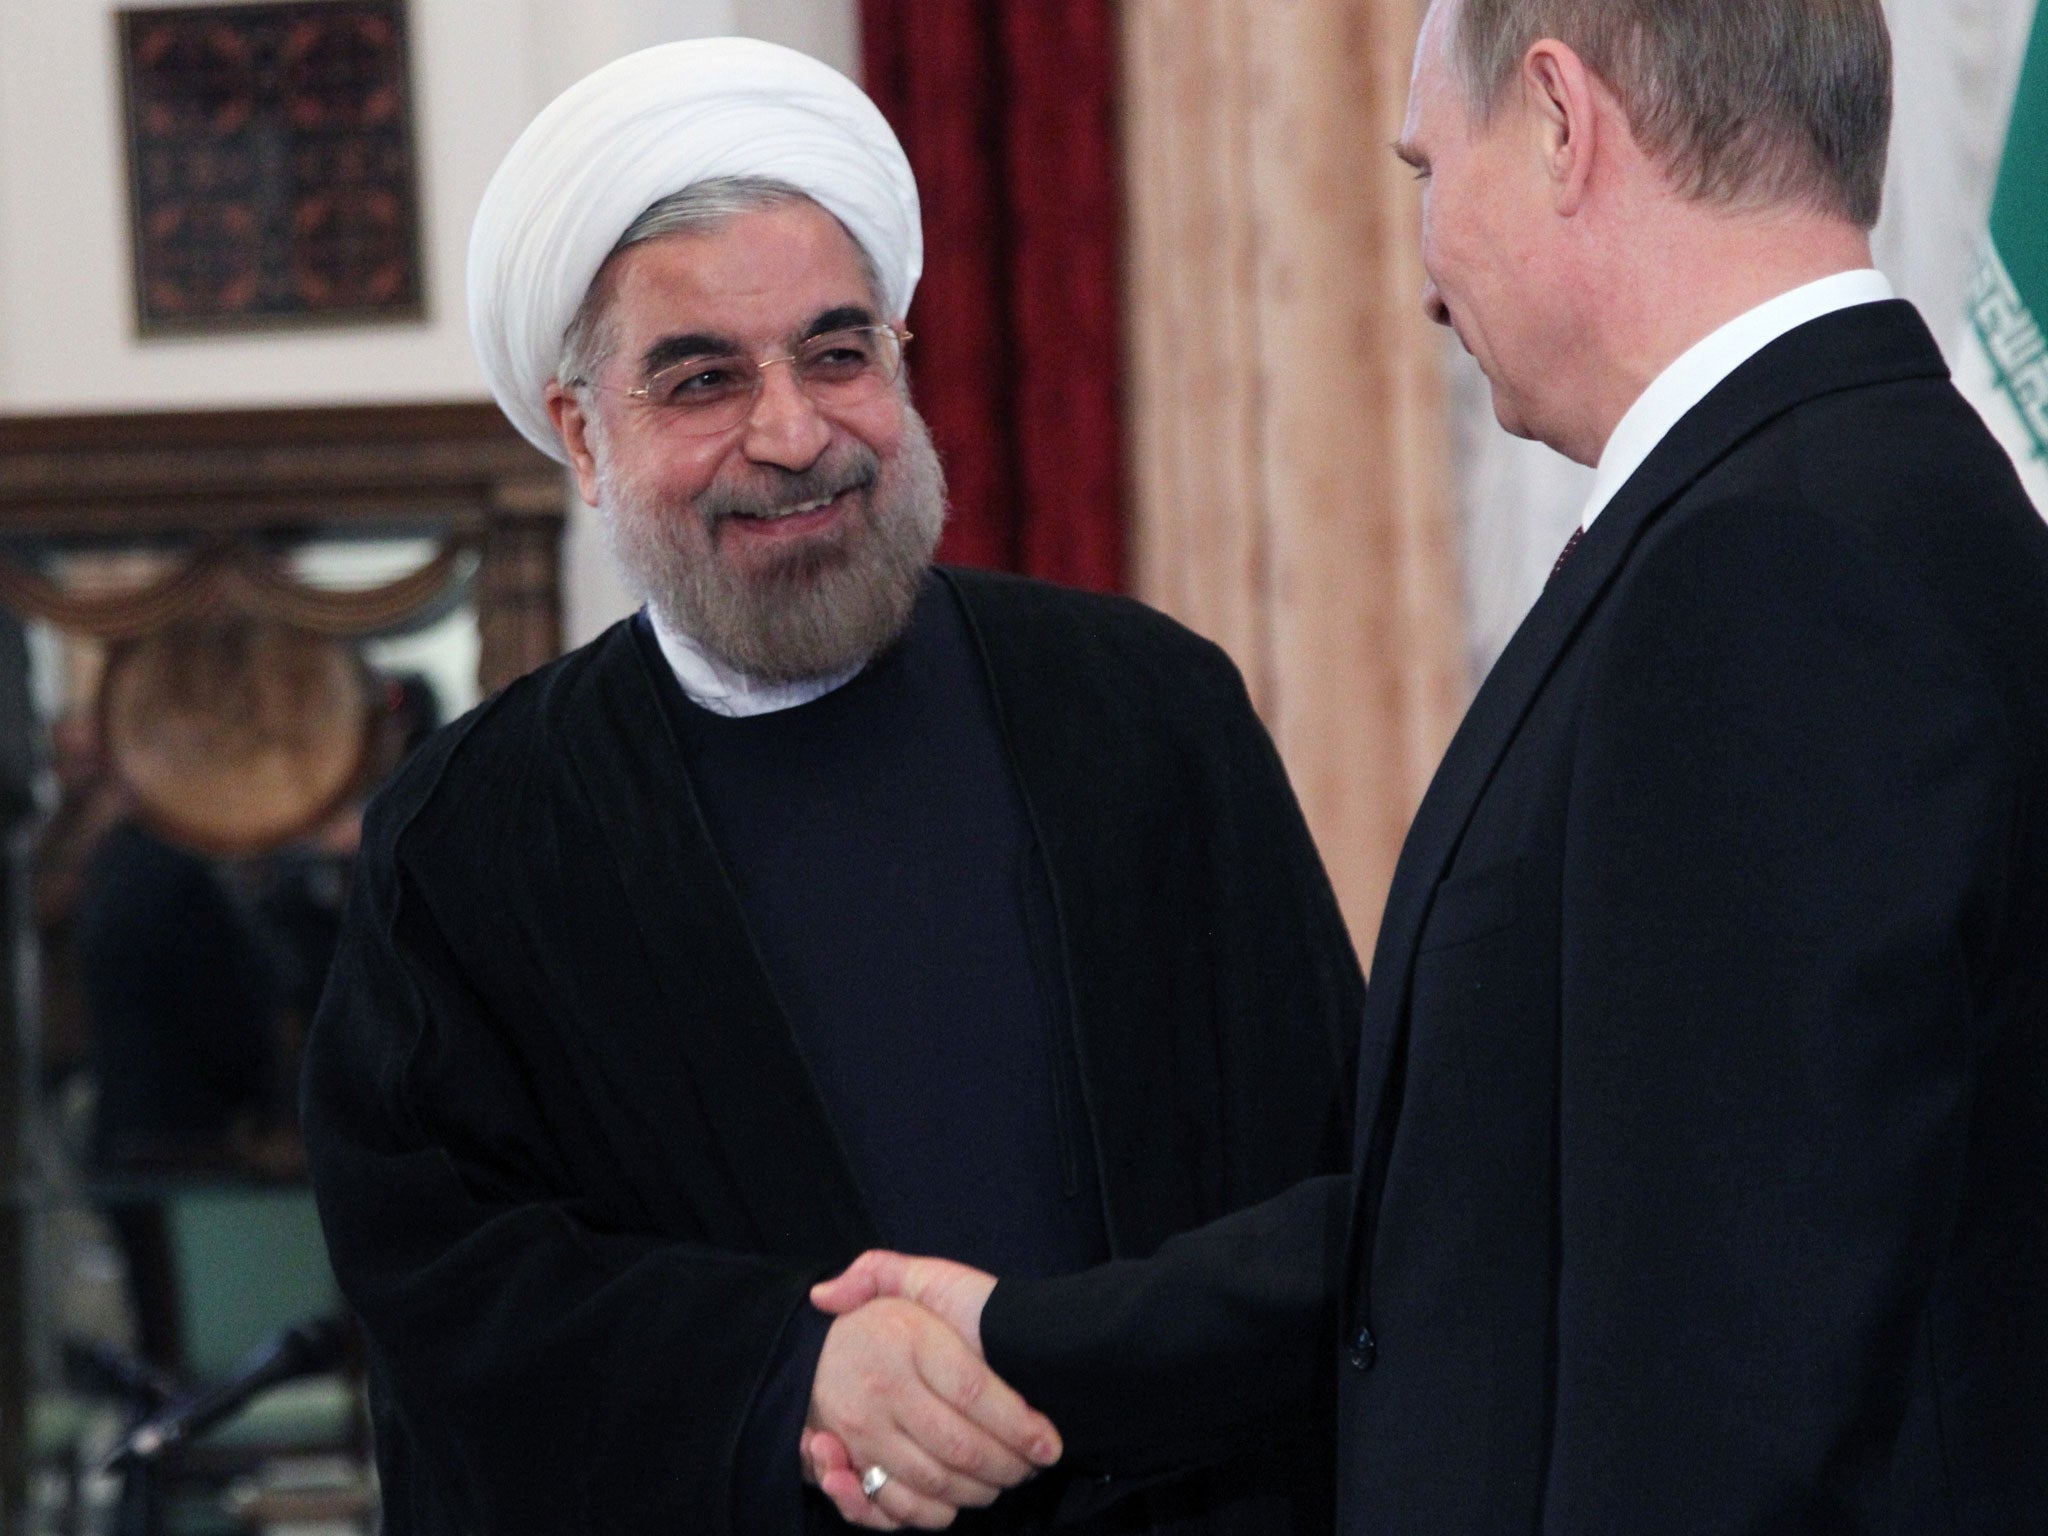 Firm friends: Mollifying words from Presidents Hassan Rouhani, and Vladimir Putin have not changed matters in Syria